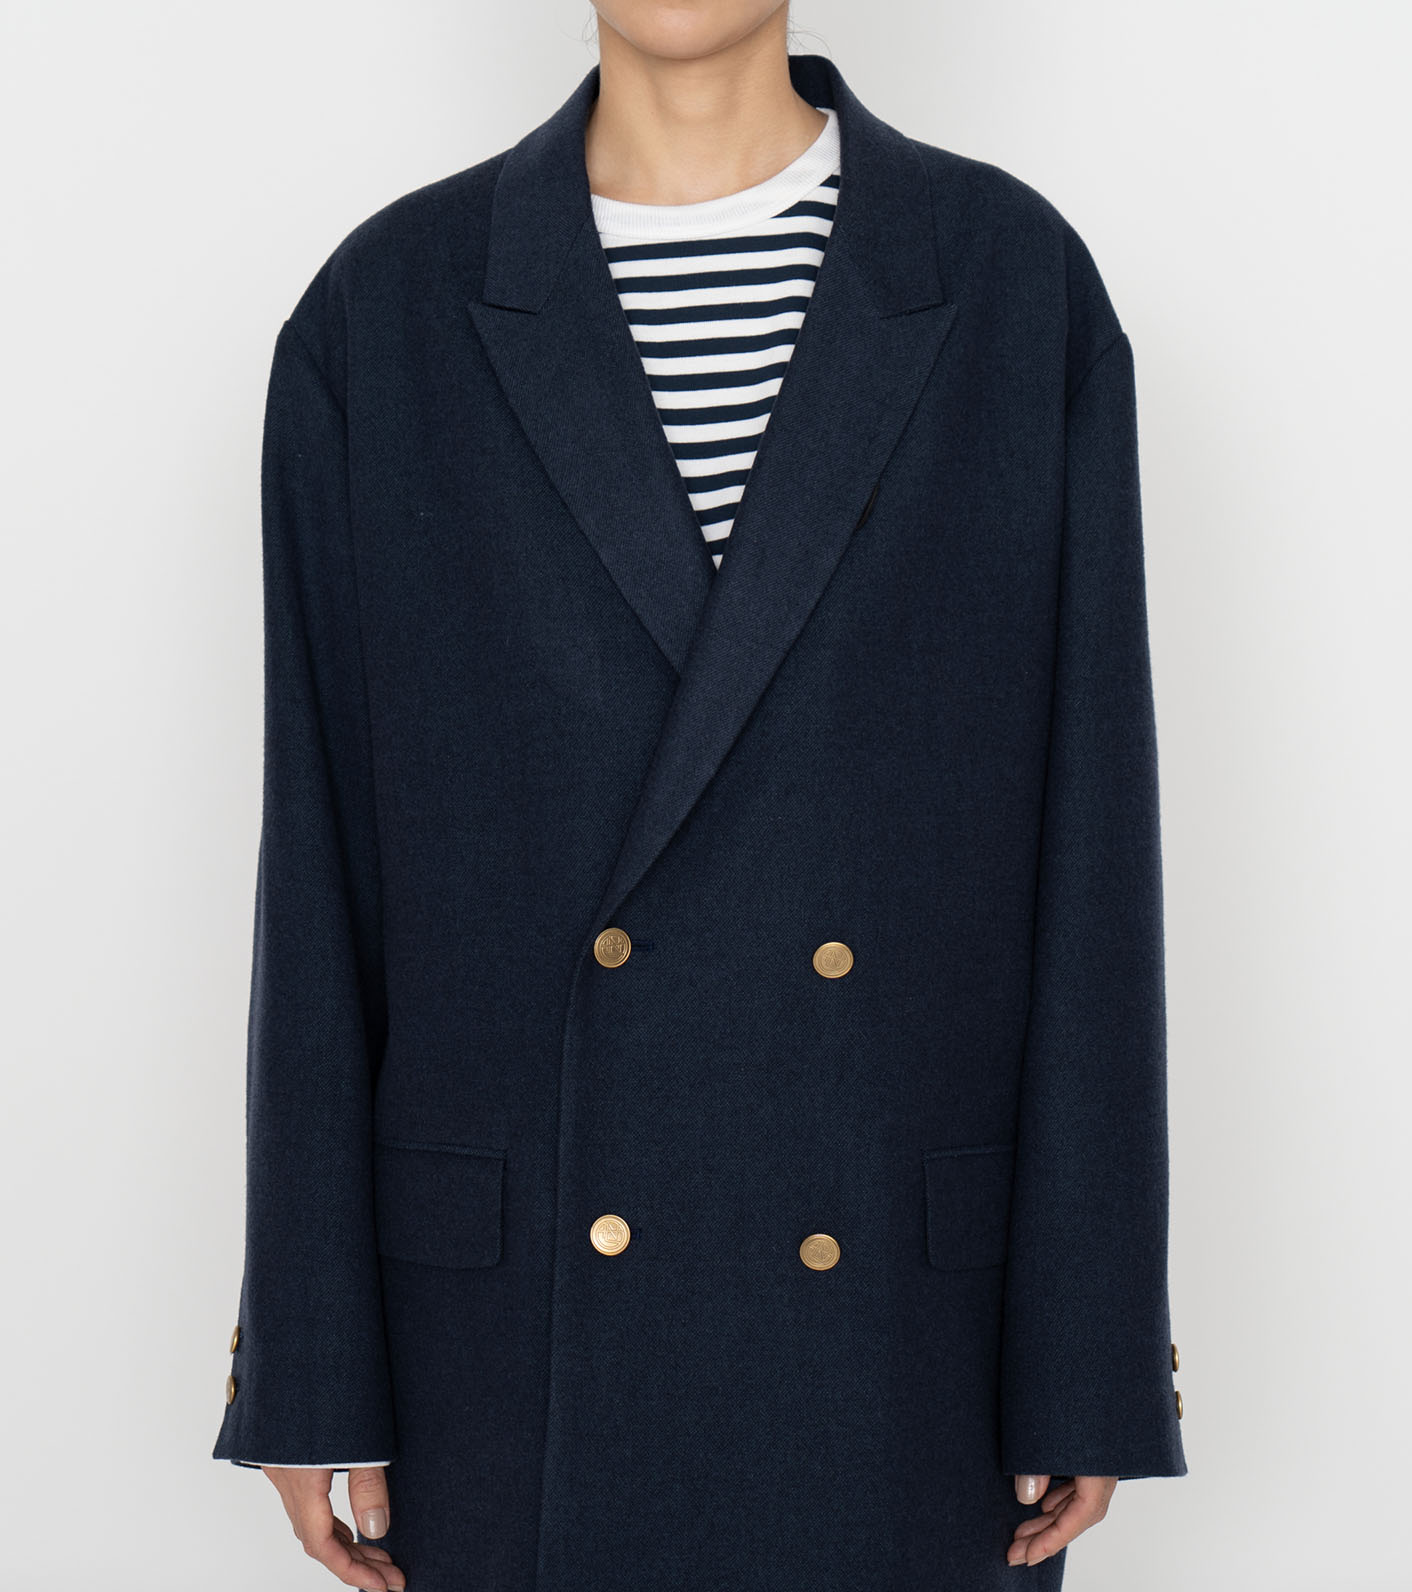 nanamica / Wool Double Breasted Jacket